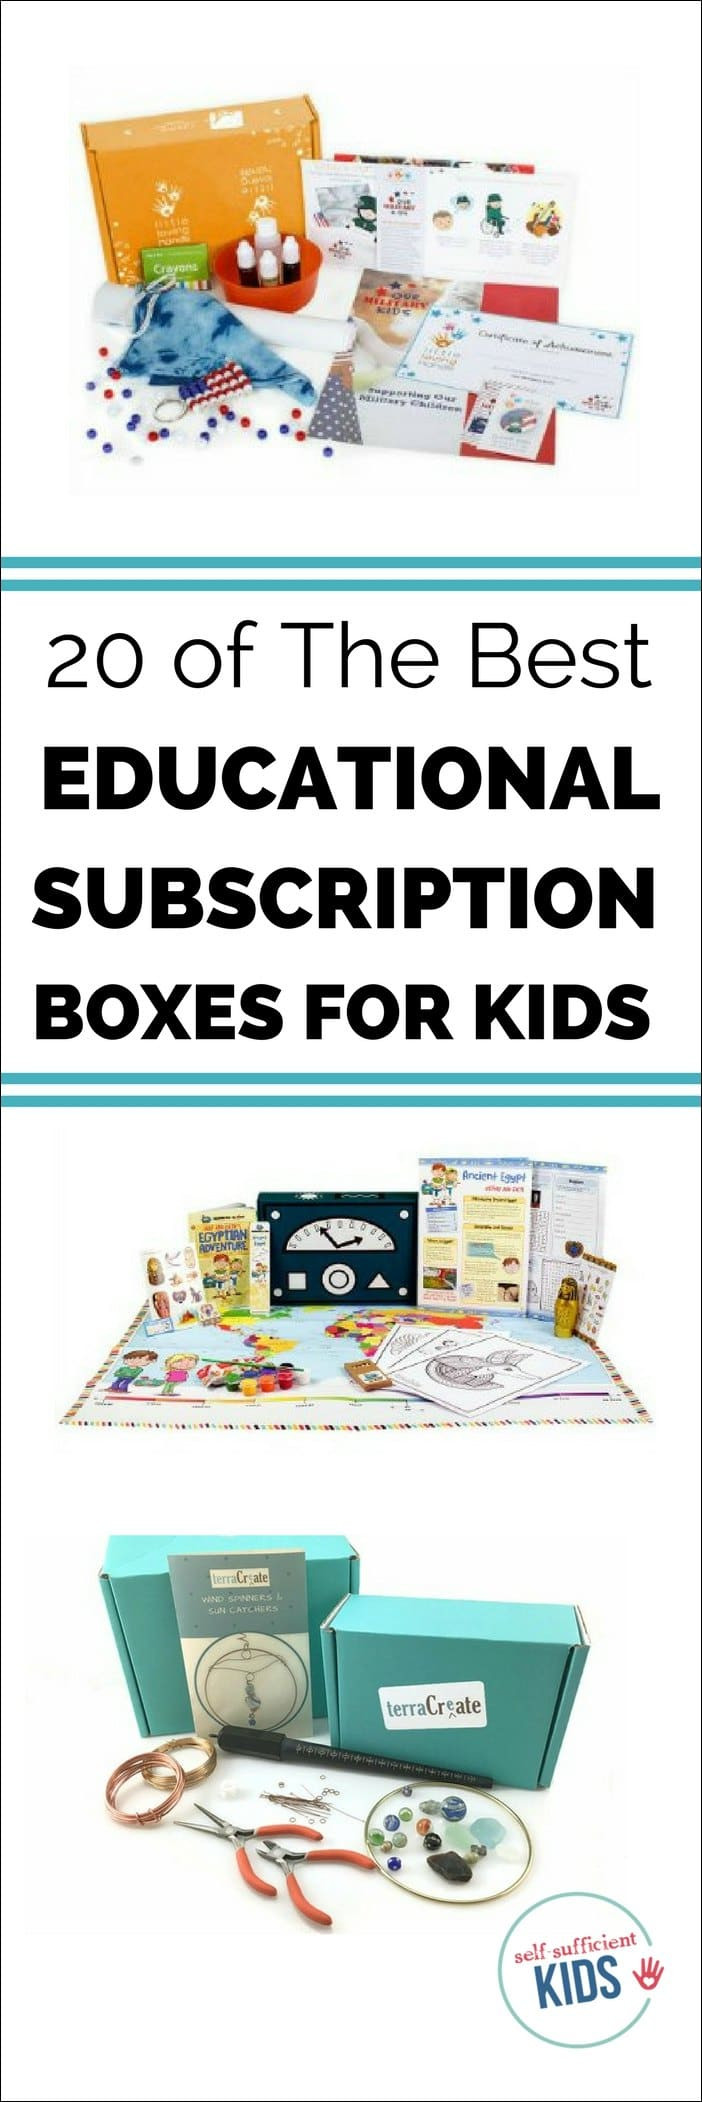 Gift Subscription For Kids
 22 Children s Gifts to Make the Holidays Less Materialistic